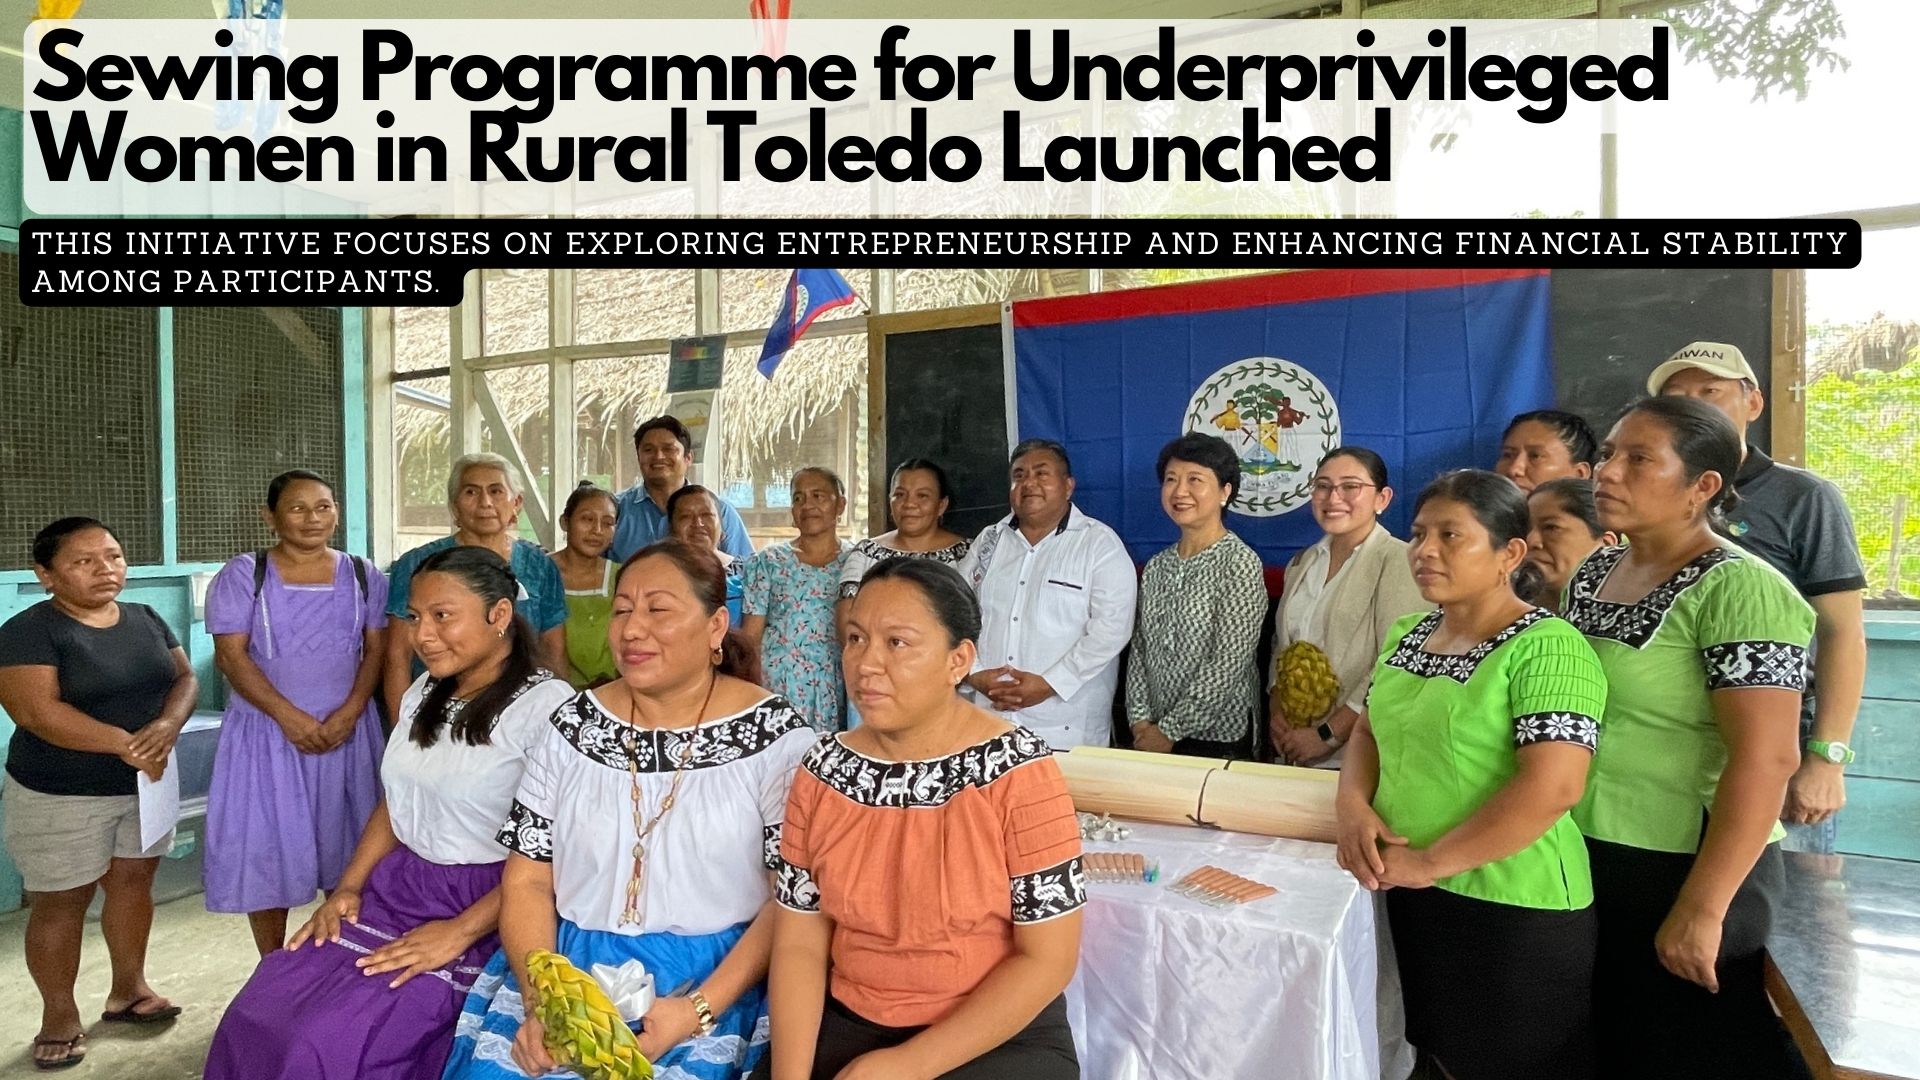 Sewing Programme for Underprivileged Women in Rural Toledo Launched